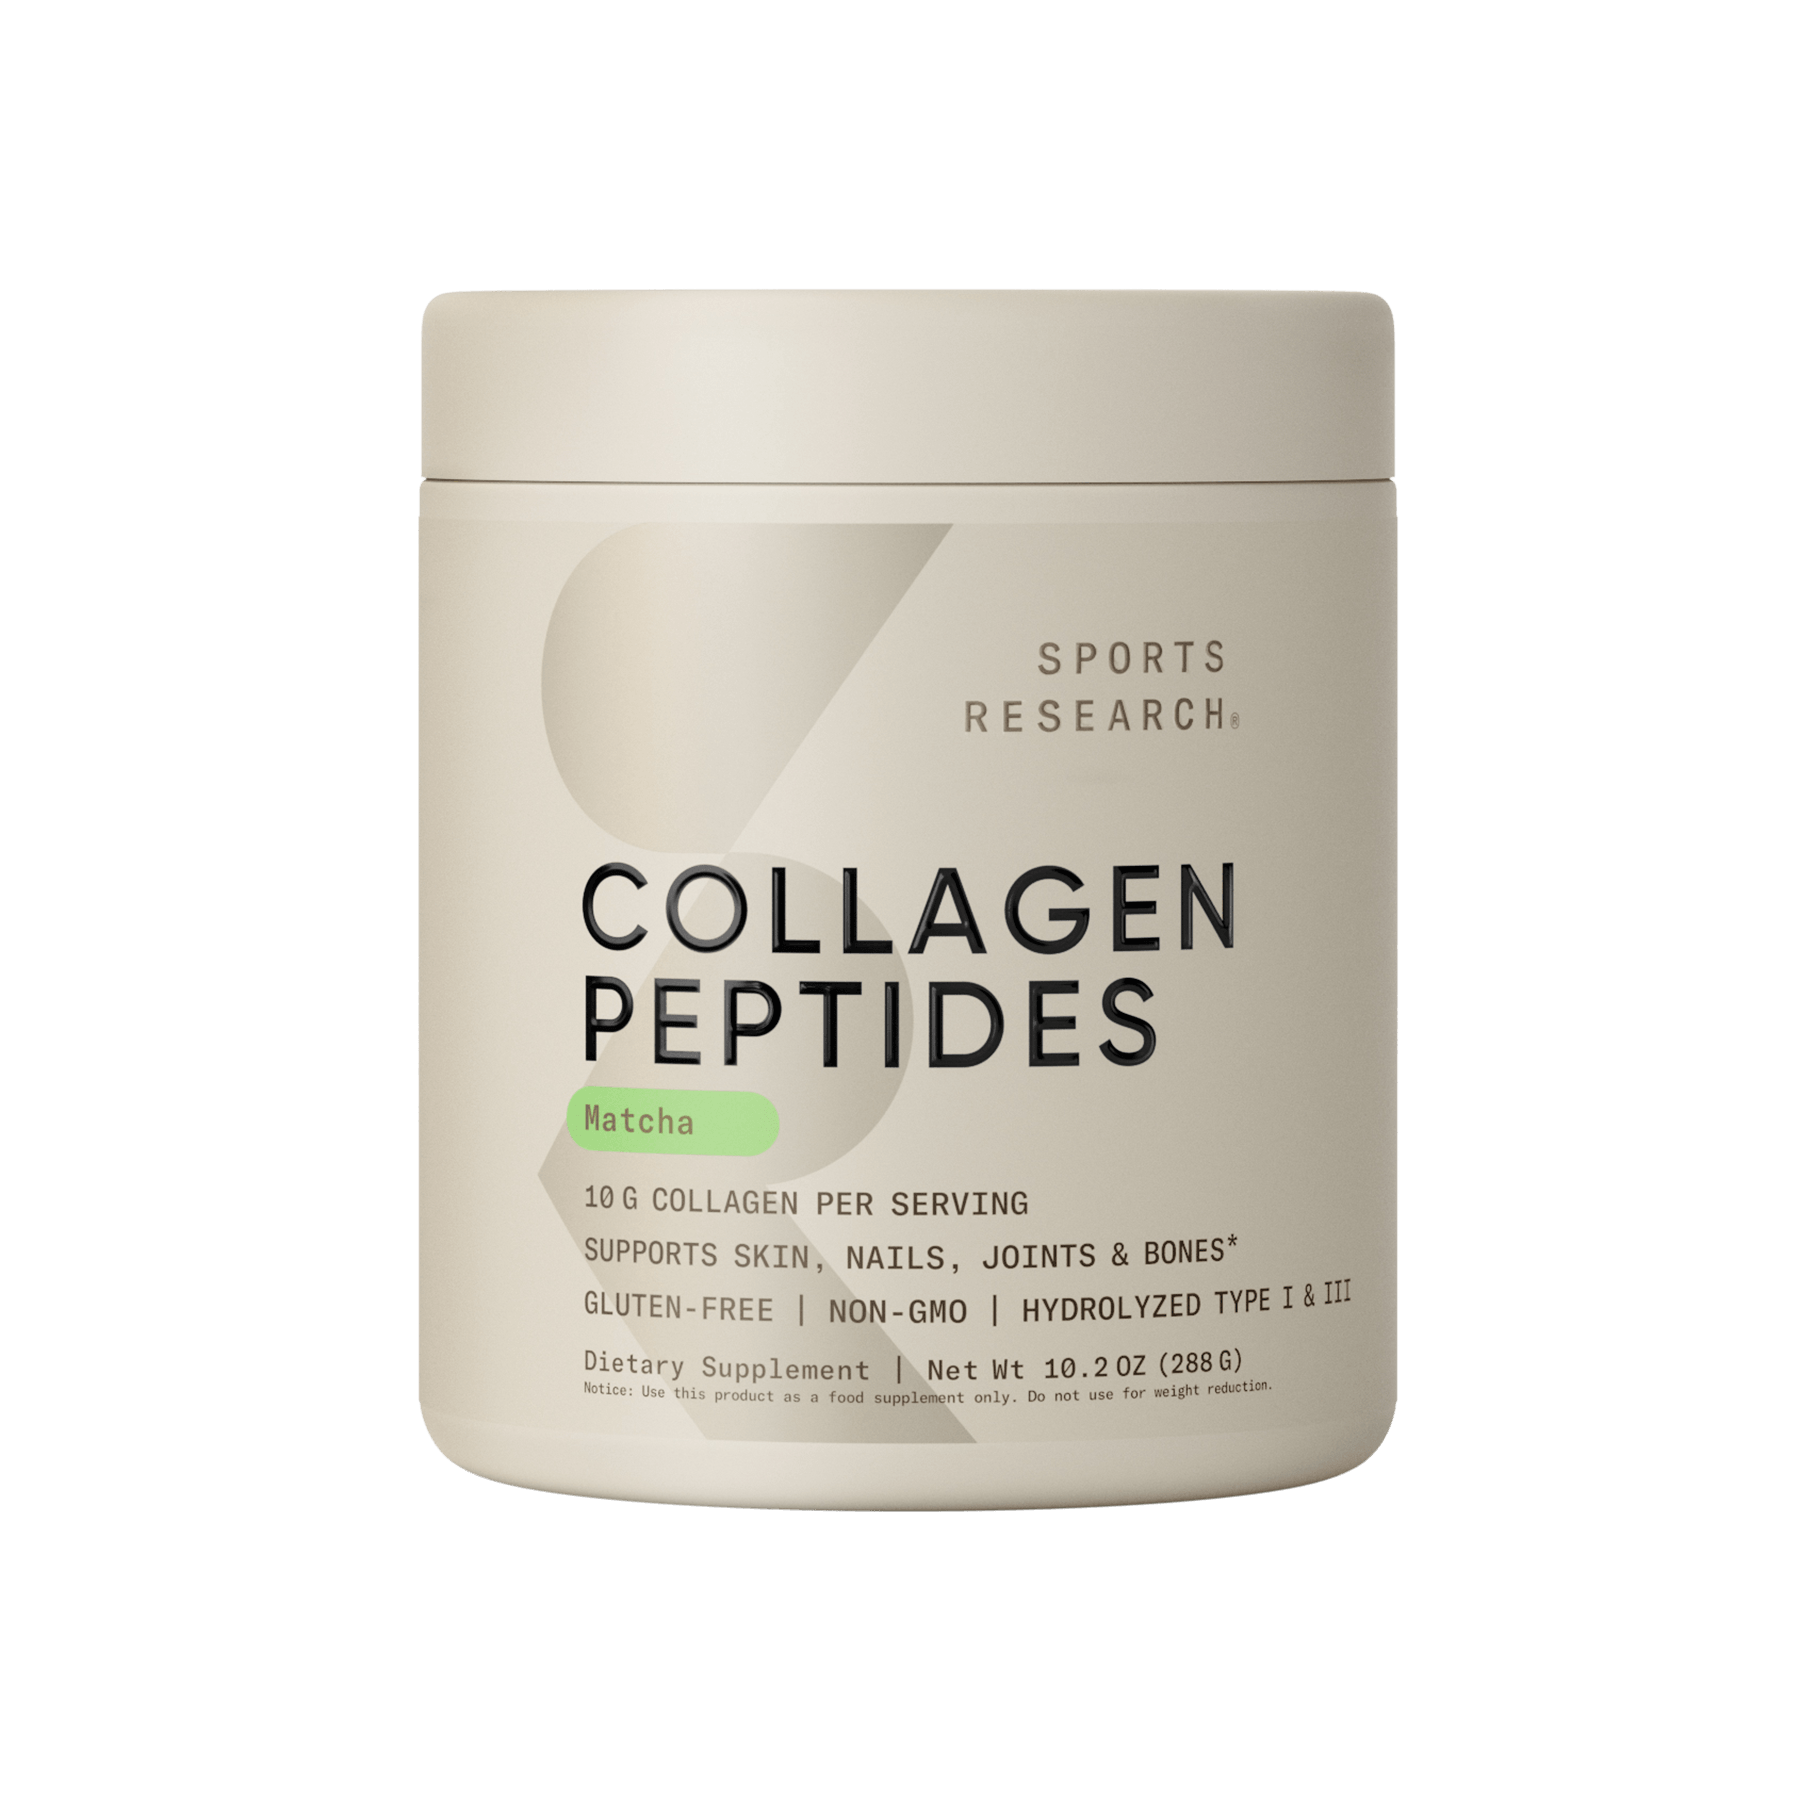 Sports Research Collagen Peptides with Matcha Green Tea.